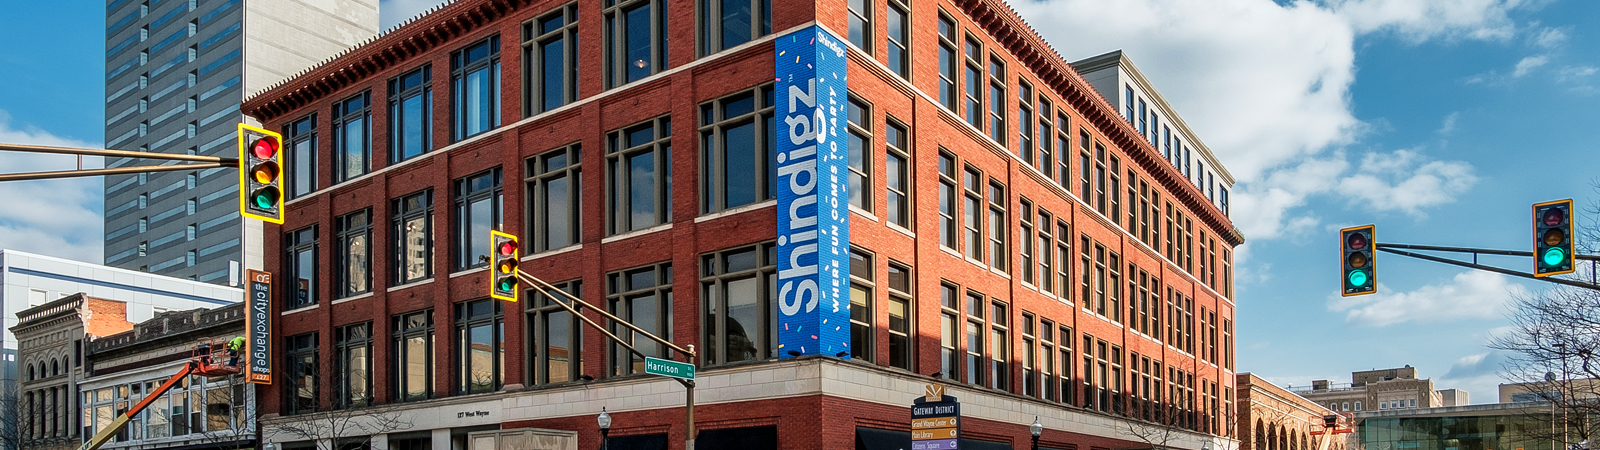 Shindigz's new downtown corporate headquarters opens in April 2019.